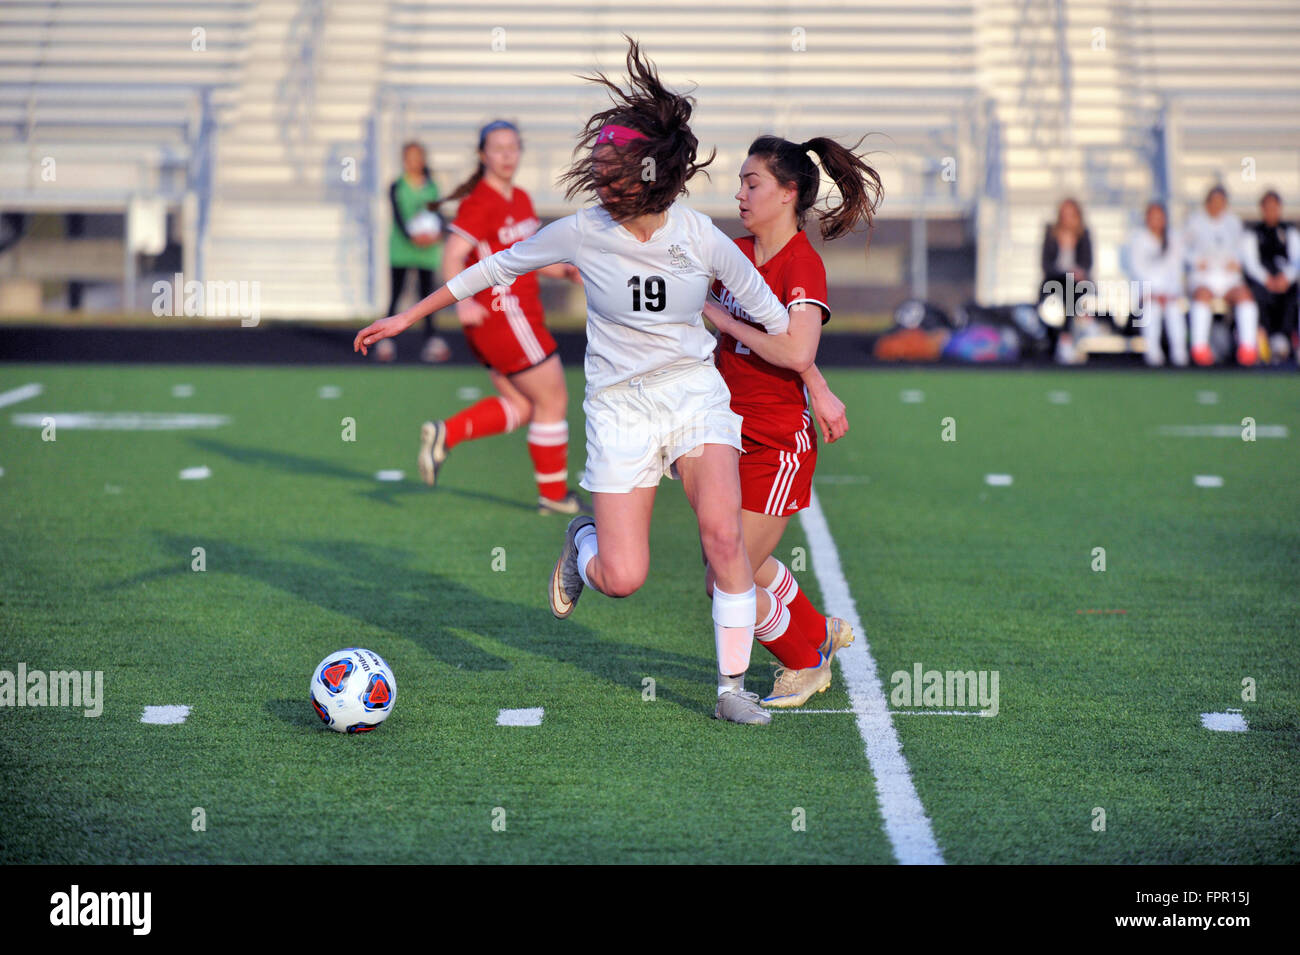 High school player controlling the ball as she cuts across the middle of the filed while looking for a teammate passing target. USA. Stock Photo